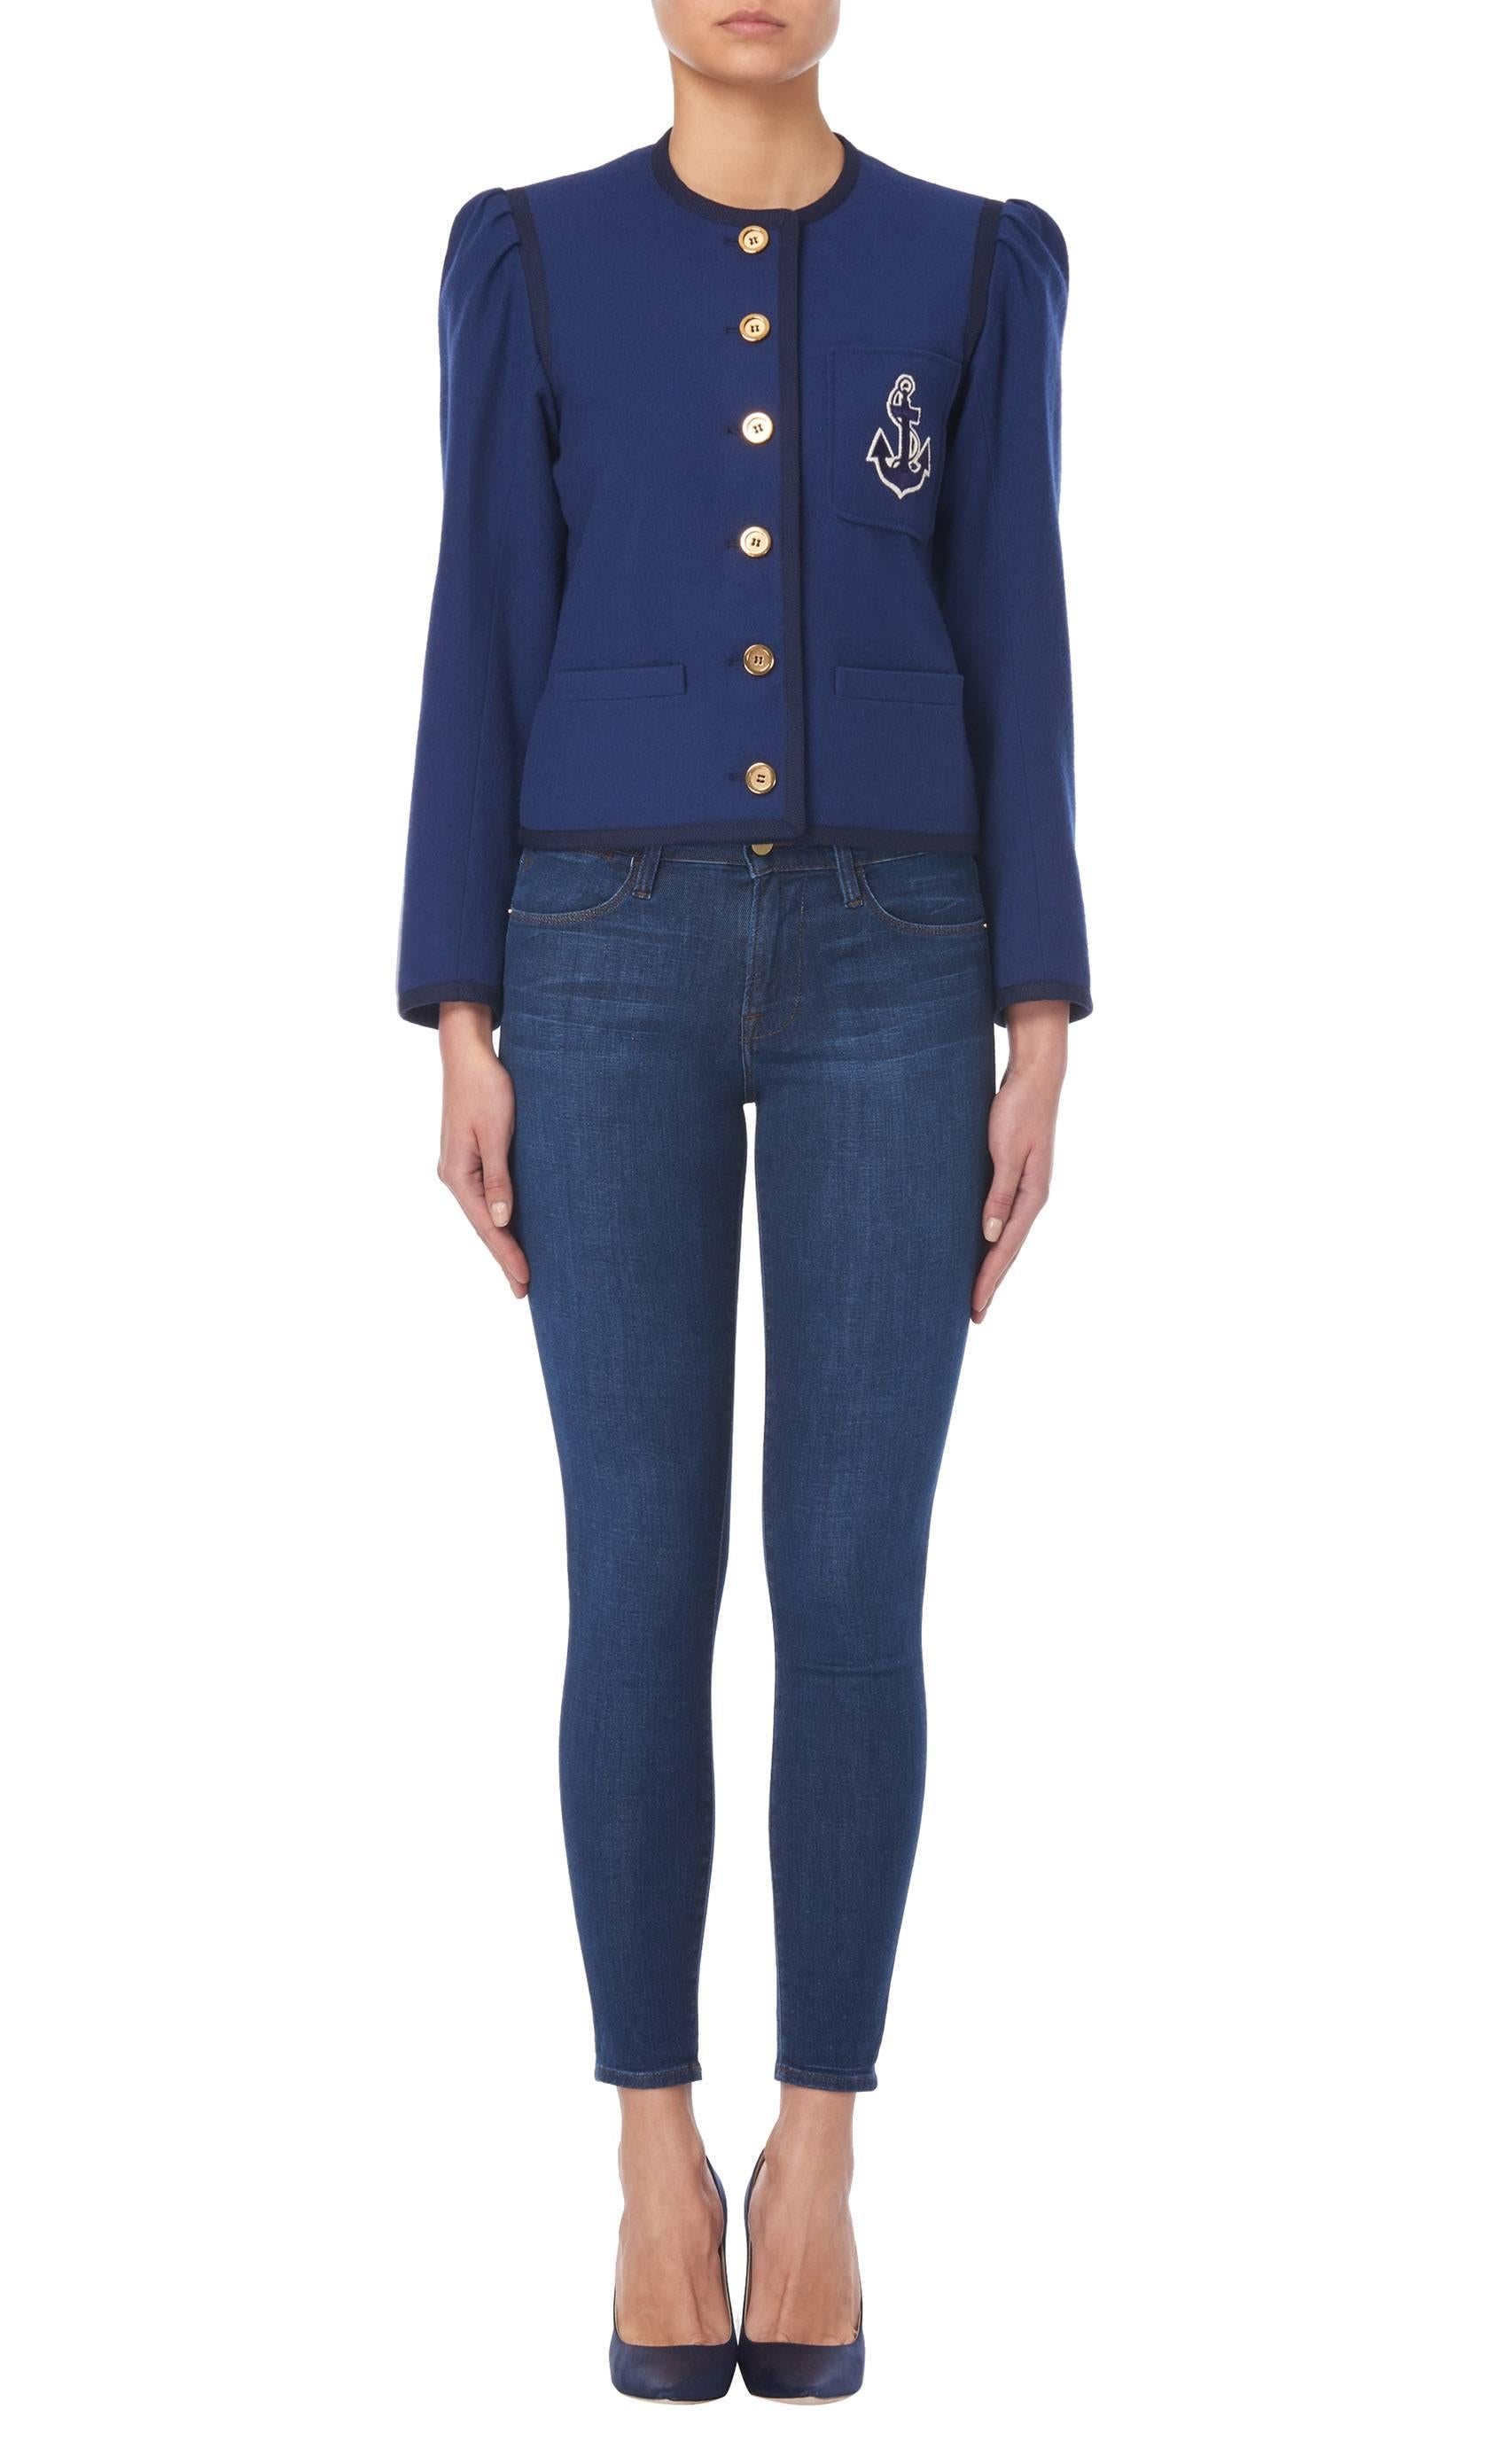 Constructed in navy wool, this Yves Saint Laurent jacket has a nautical feel with a navy and white anchor embroidered on the chest pocket. Featuring a round neckline and long sleeves, the jacket is edged with navy braided trim and fastens to the